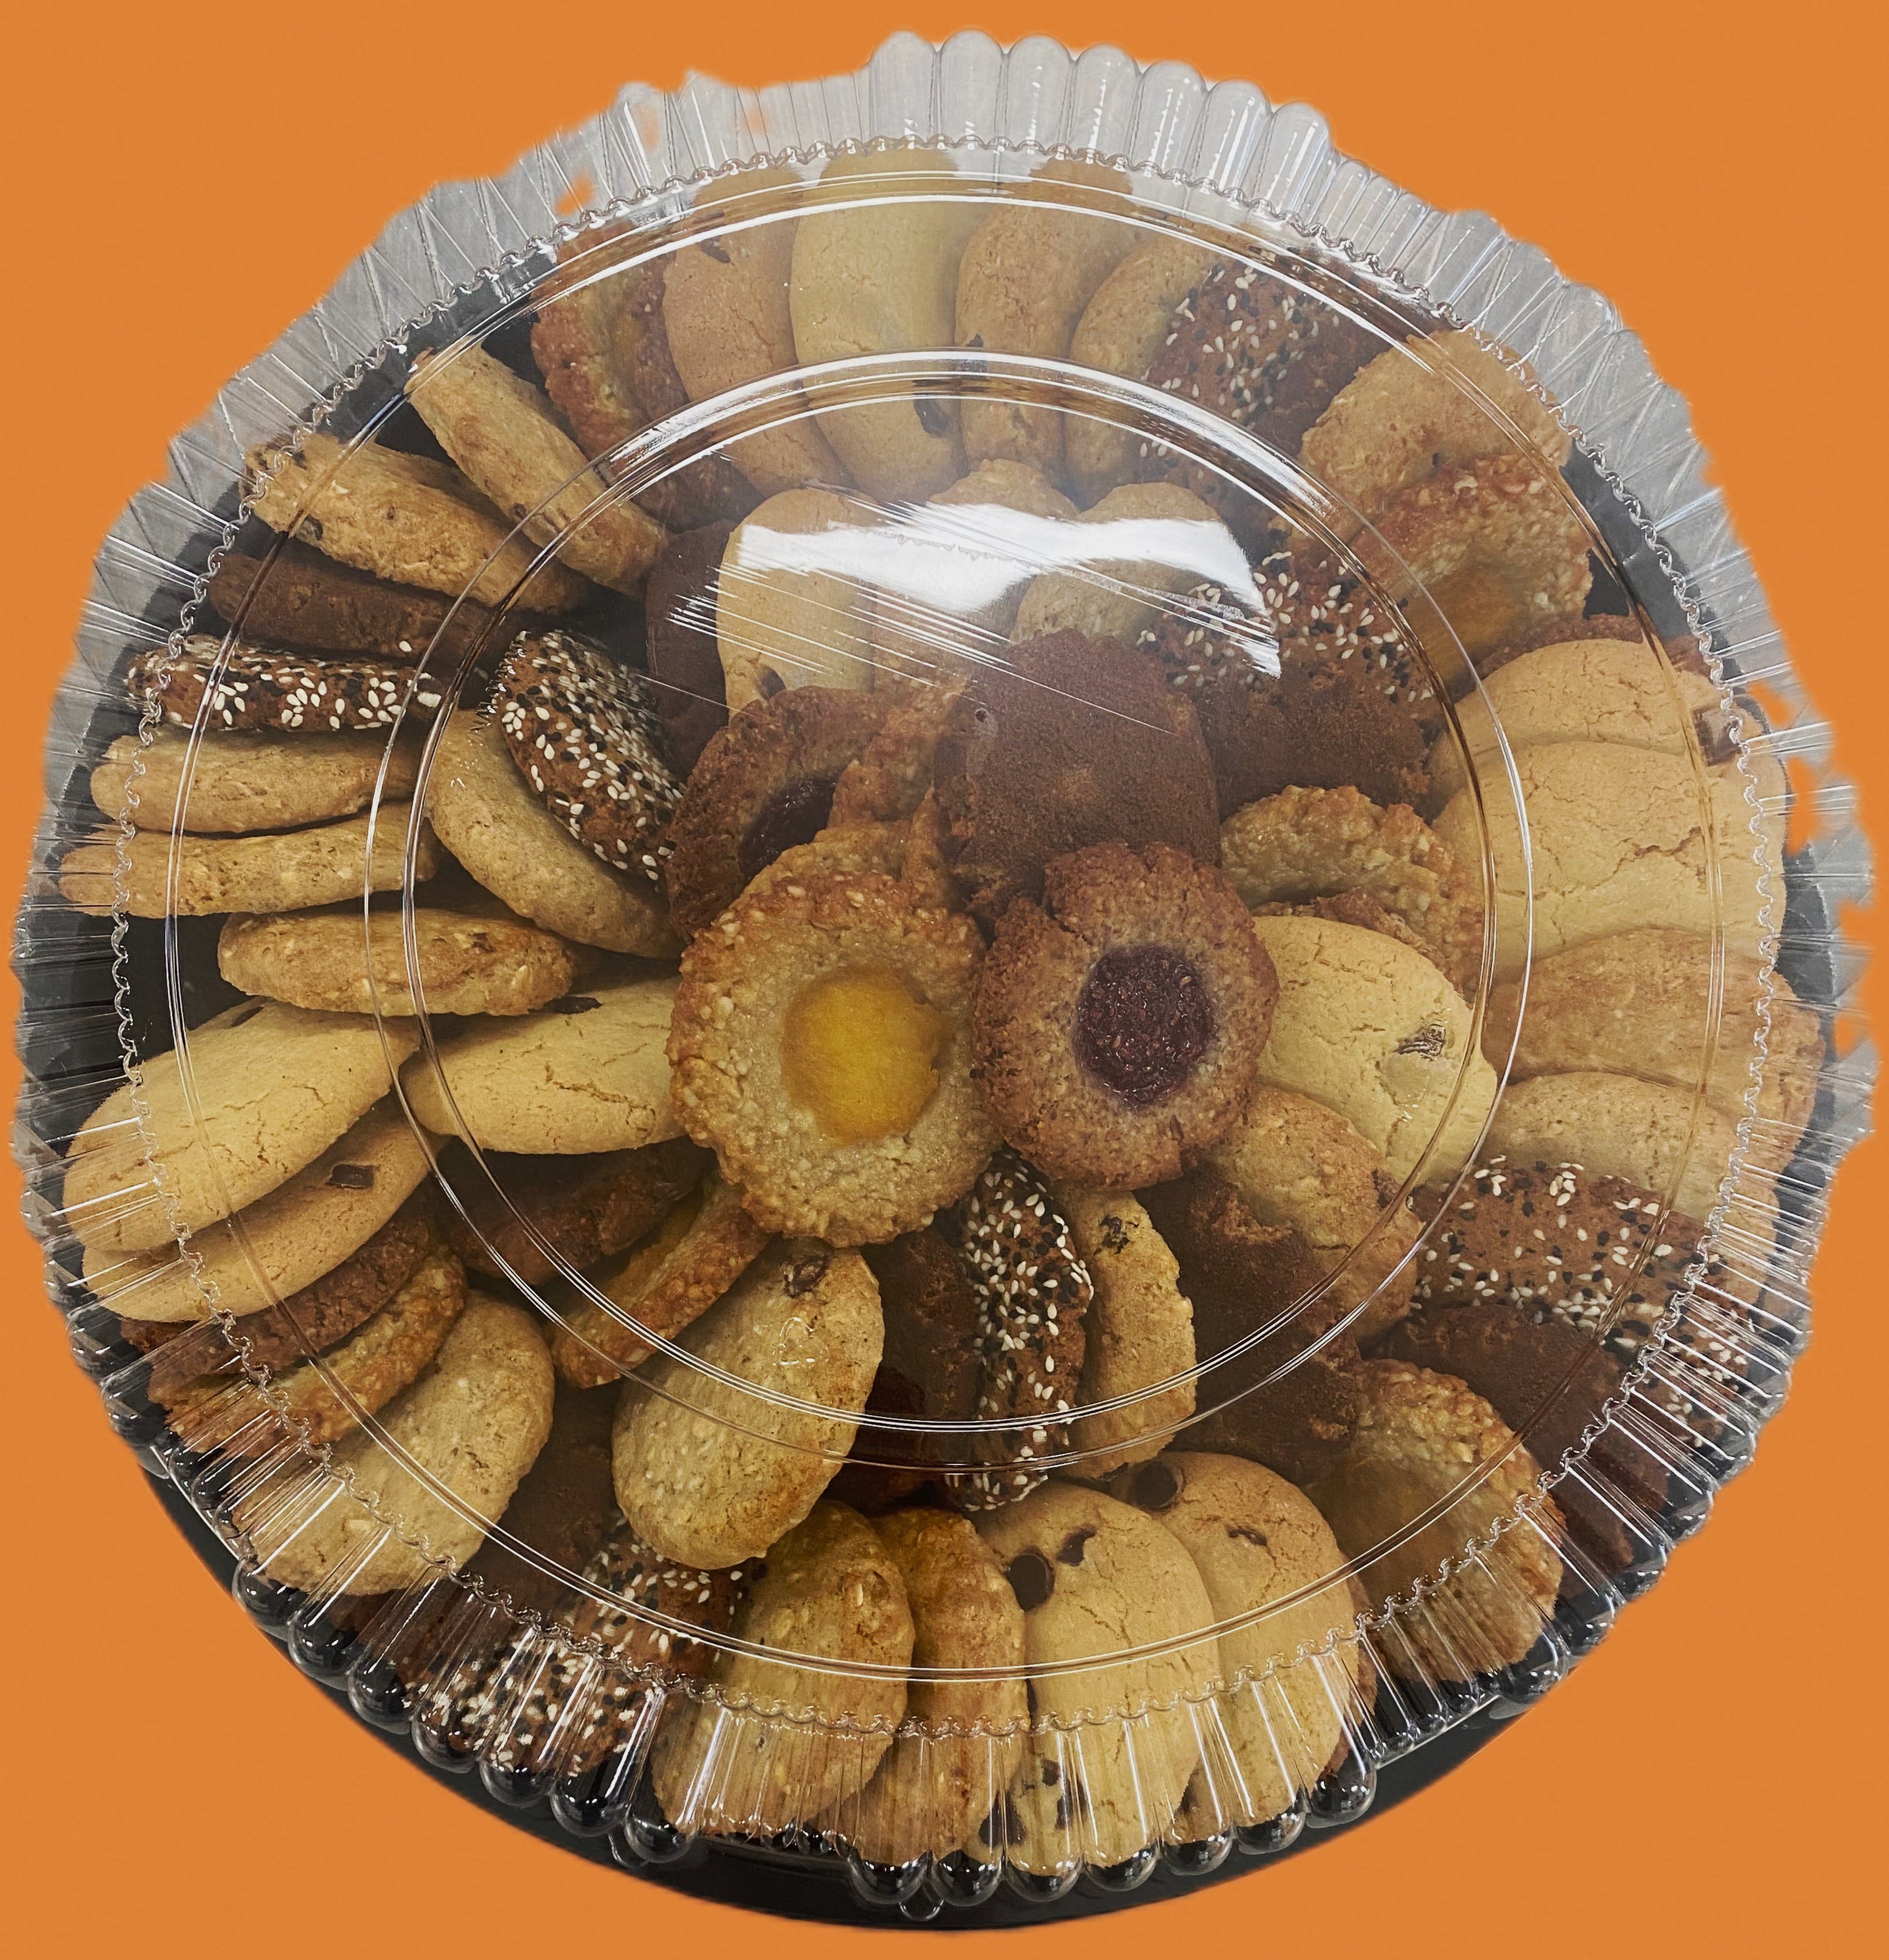 Assorted Cookie Platters 16 inch (Not Available for shipping)